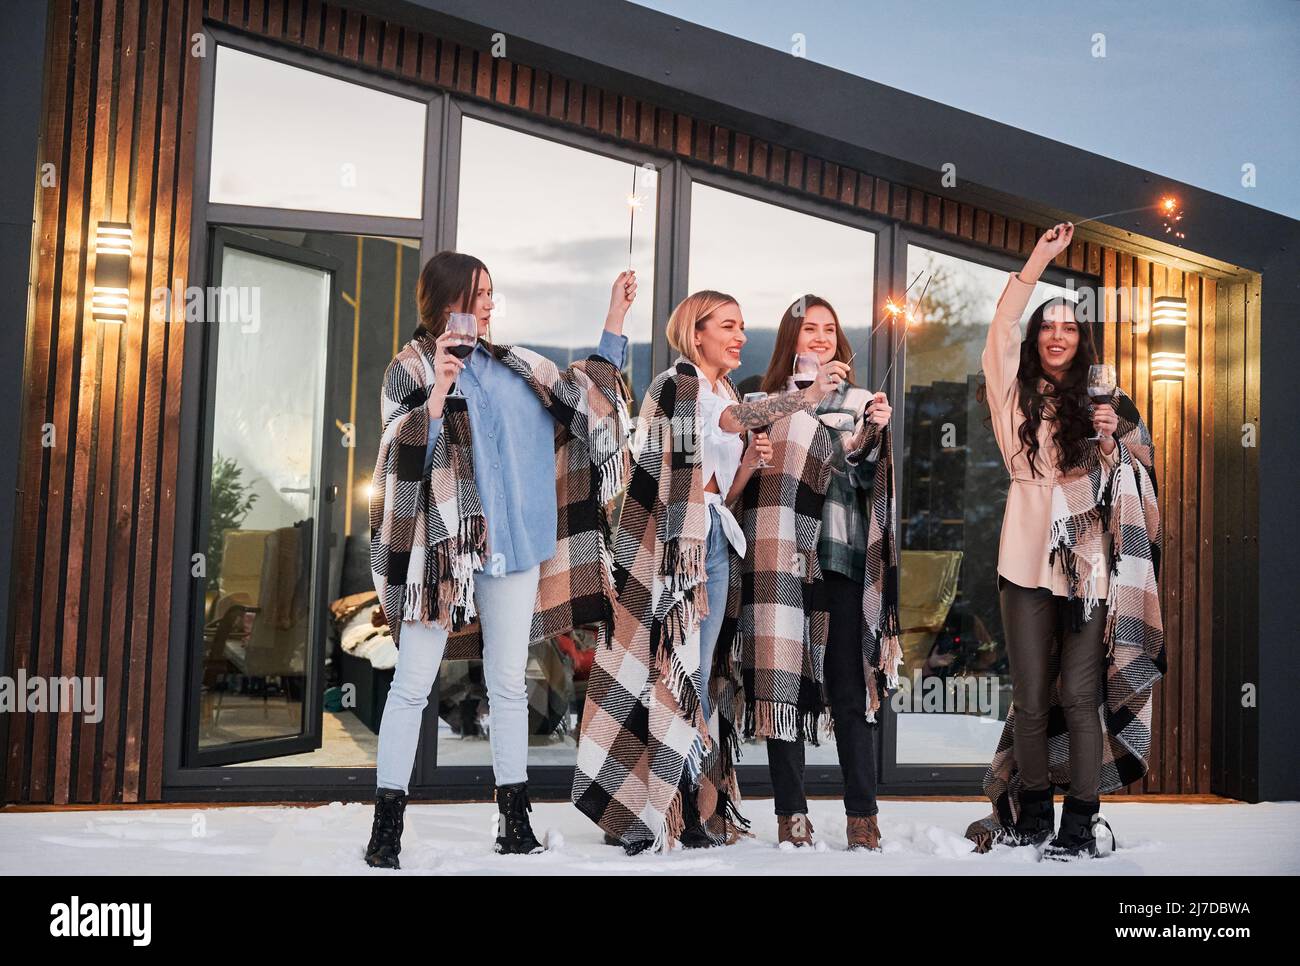 Young women enjoying winter weekends on terrace of contemporary barnhouse. Four girls in plaids drinking wine and celebrating with sparklers in the evening. Stock Photo